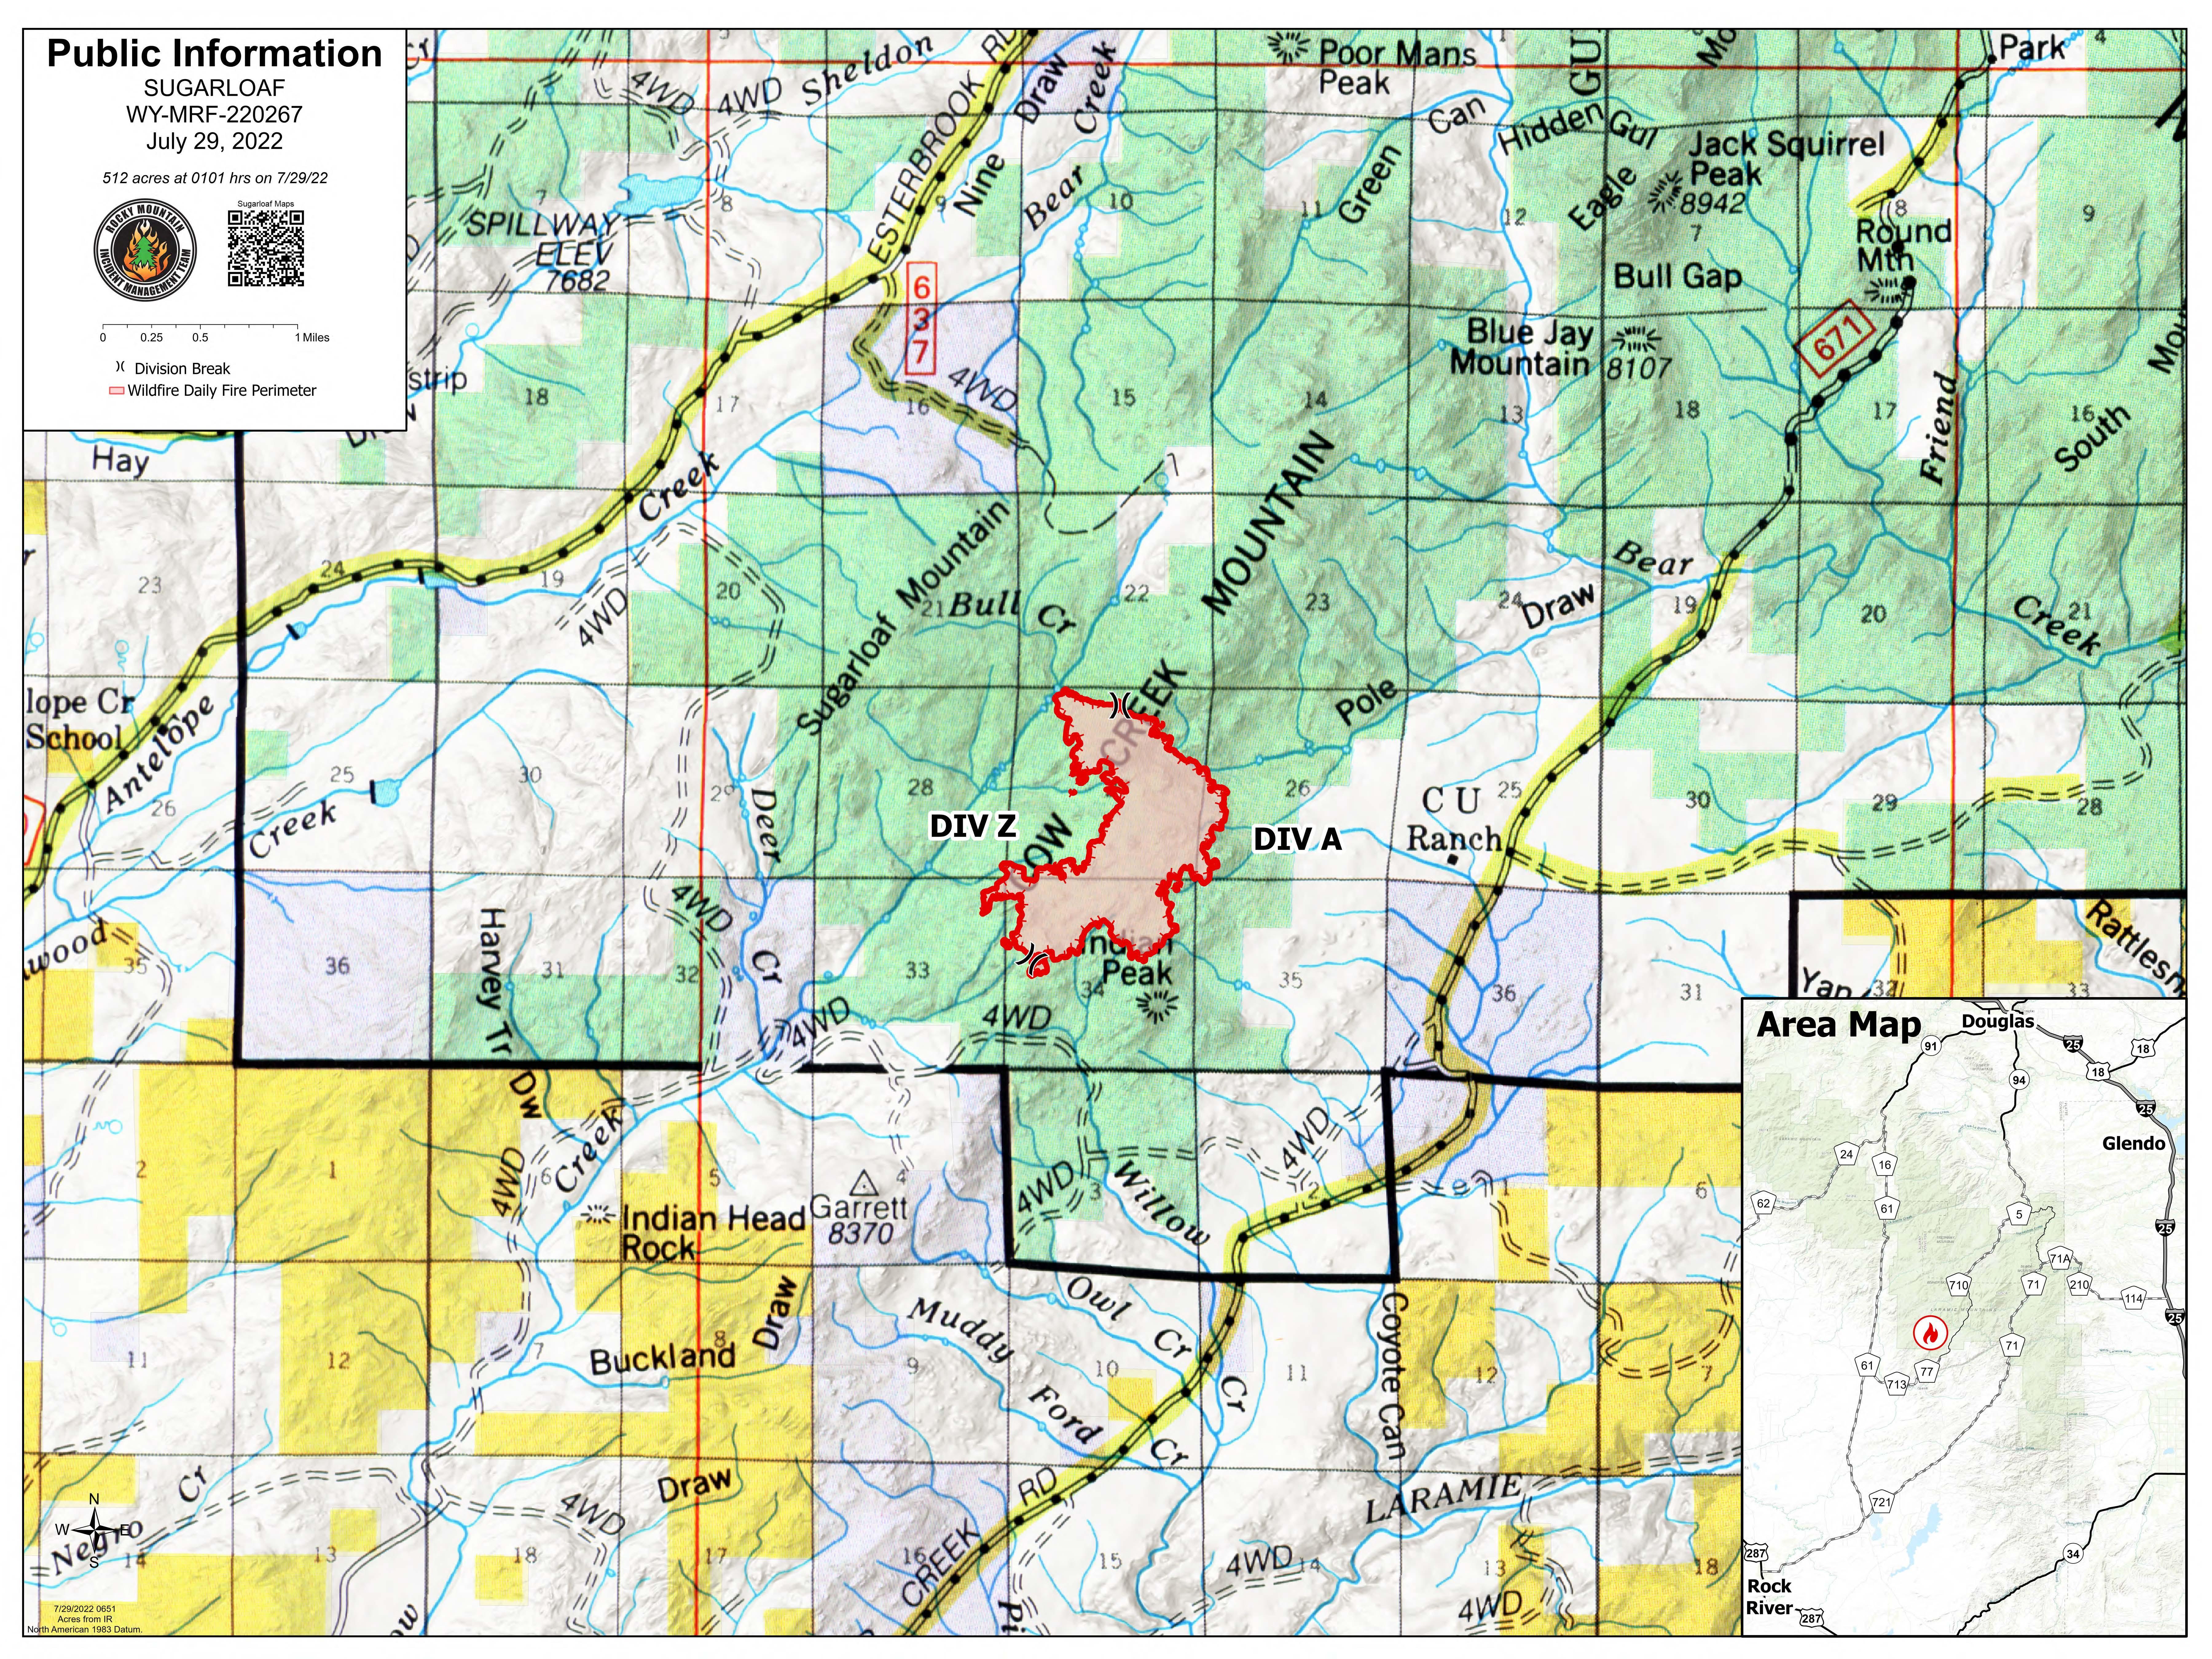 Sugarloaf Fire Pubic Information Map for July 29